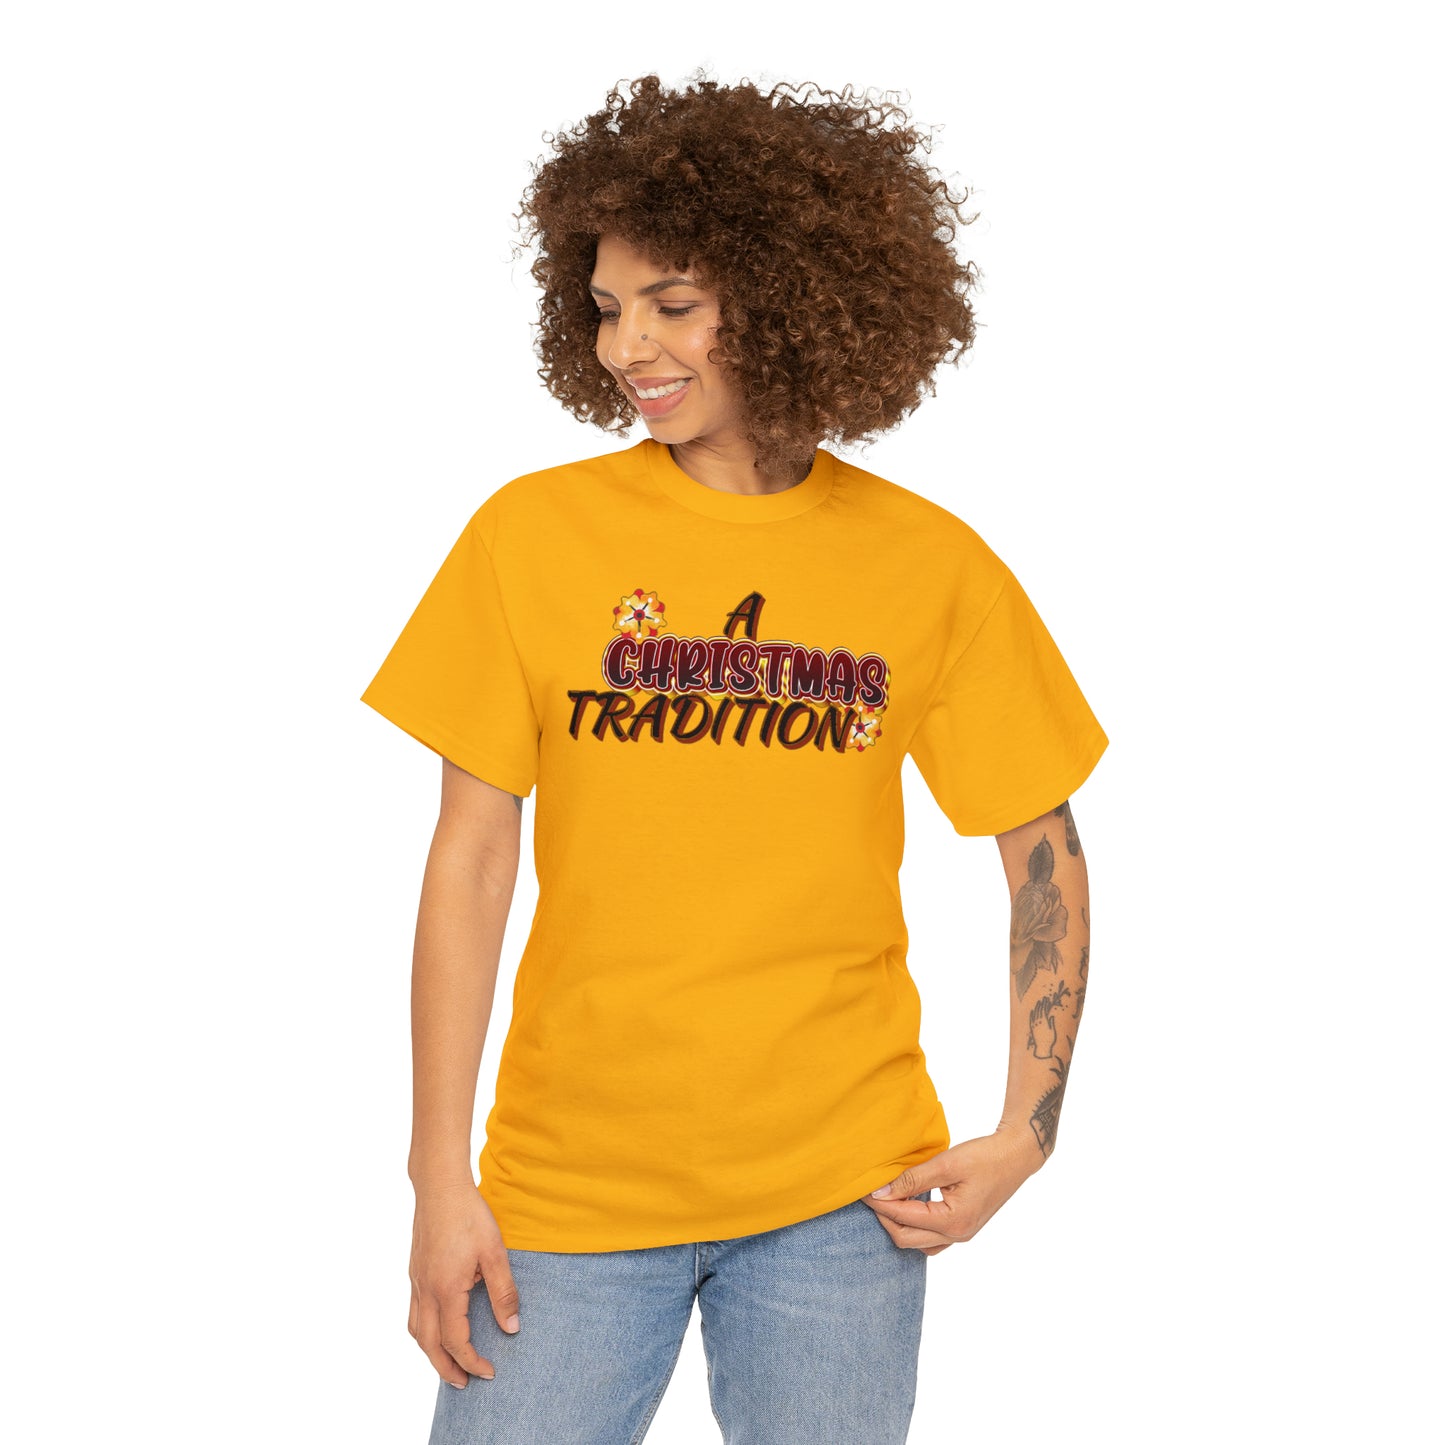 A Christmas Tradition - Heavy Cotton Tee for Men and Women